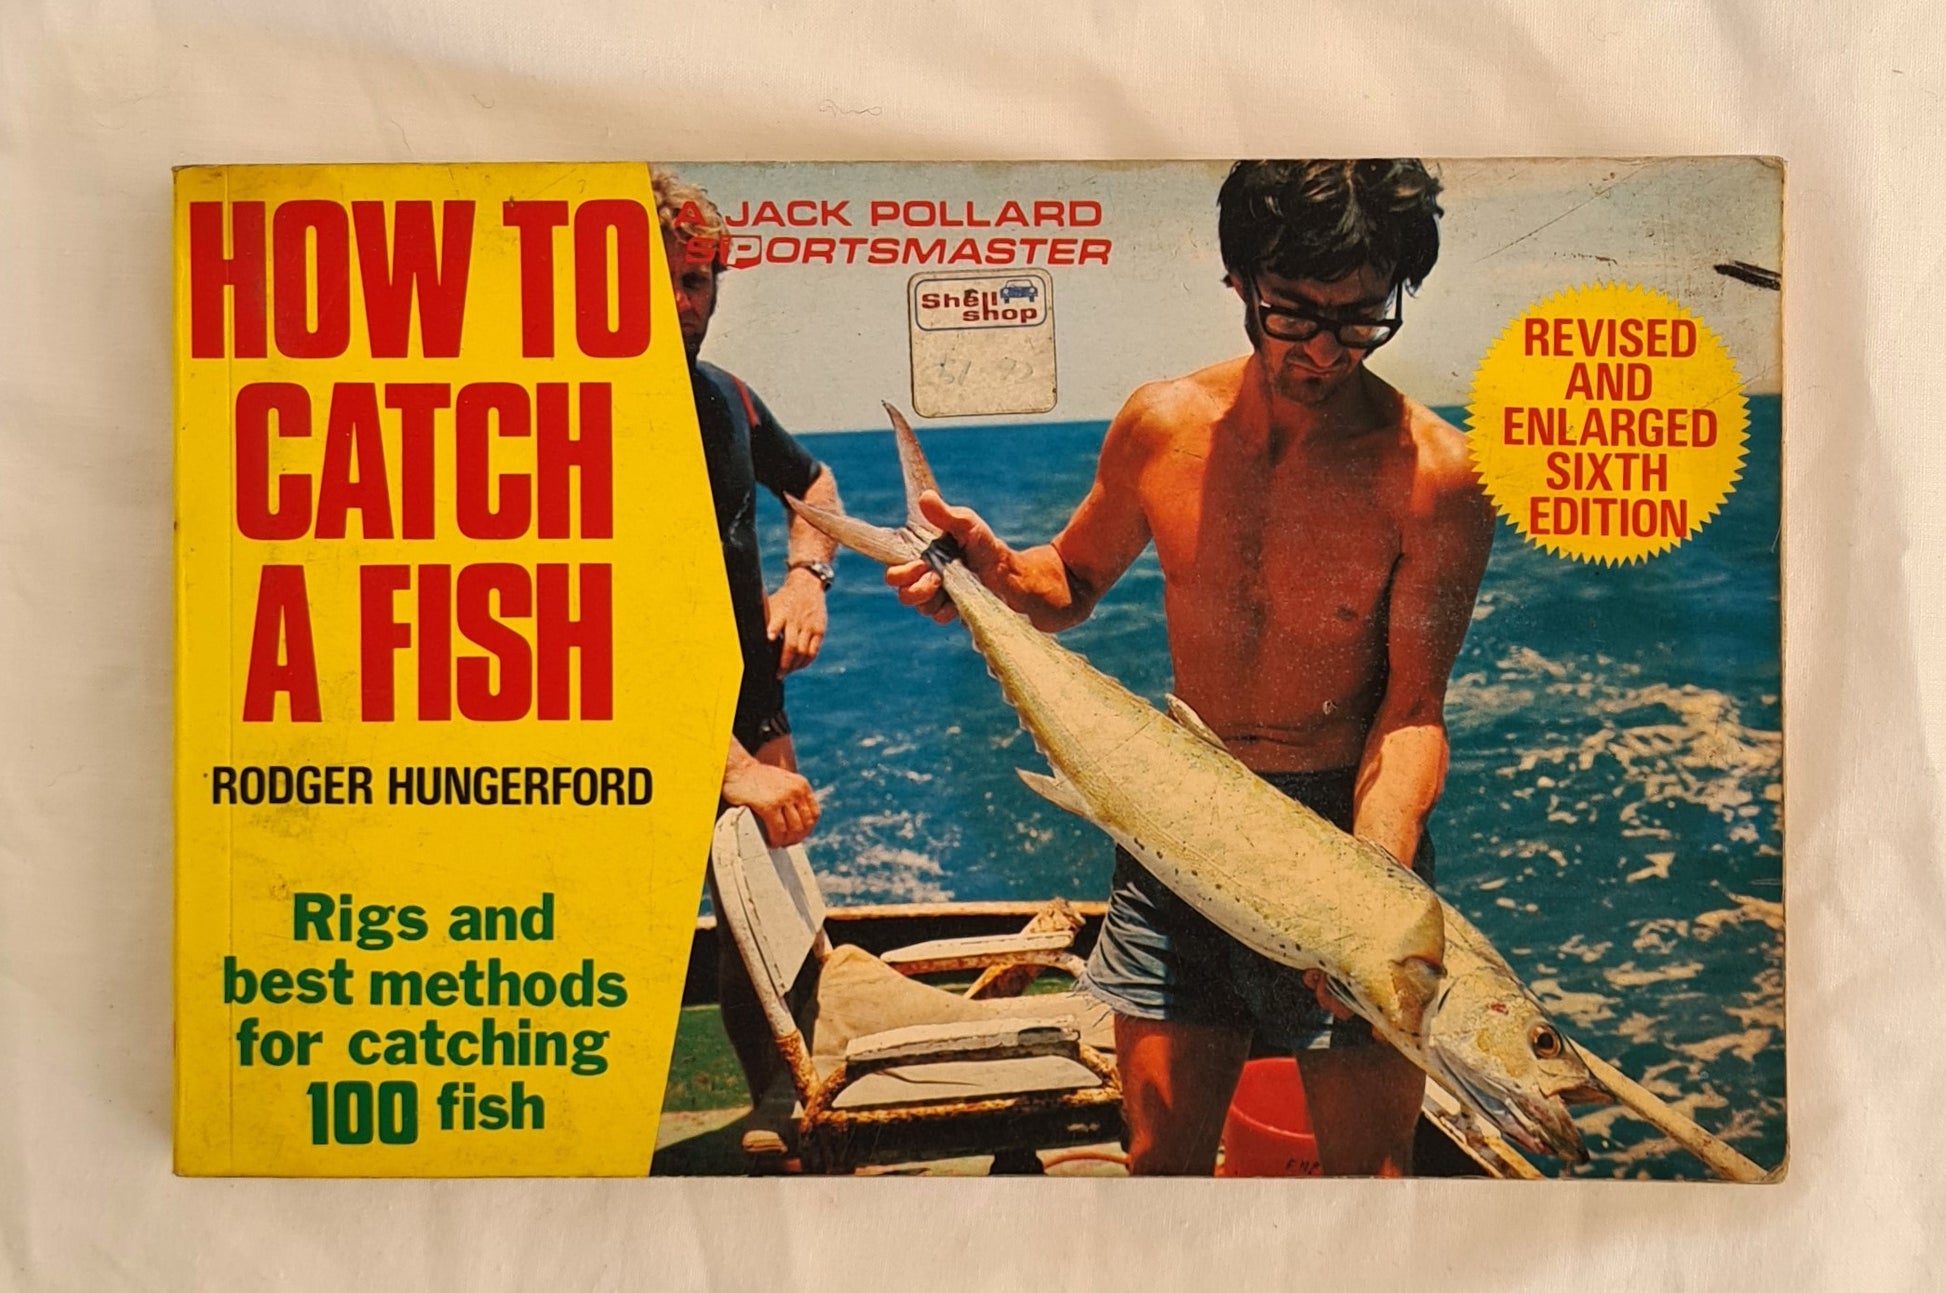 How To Catch a Fish by Rodger Hungerford